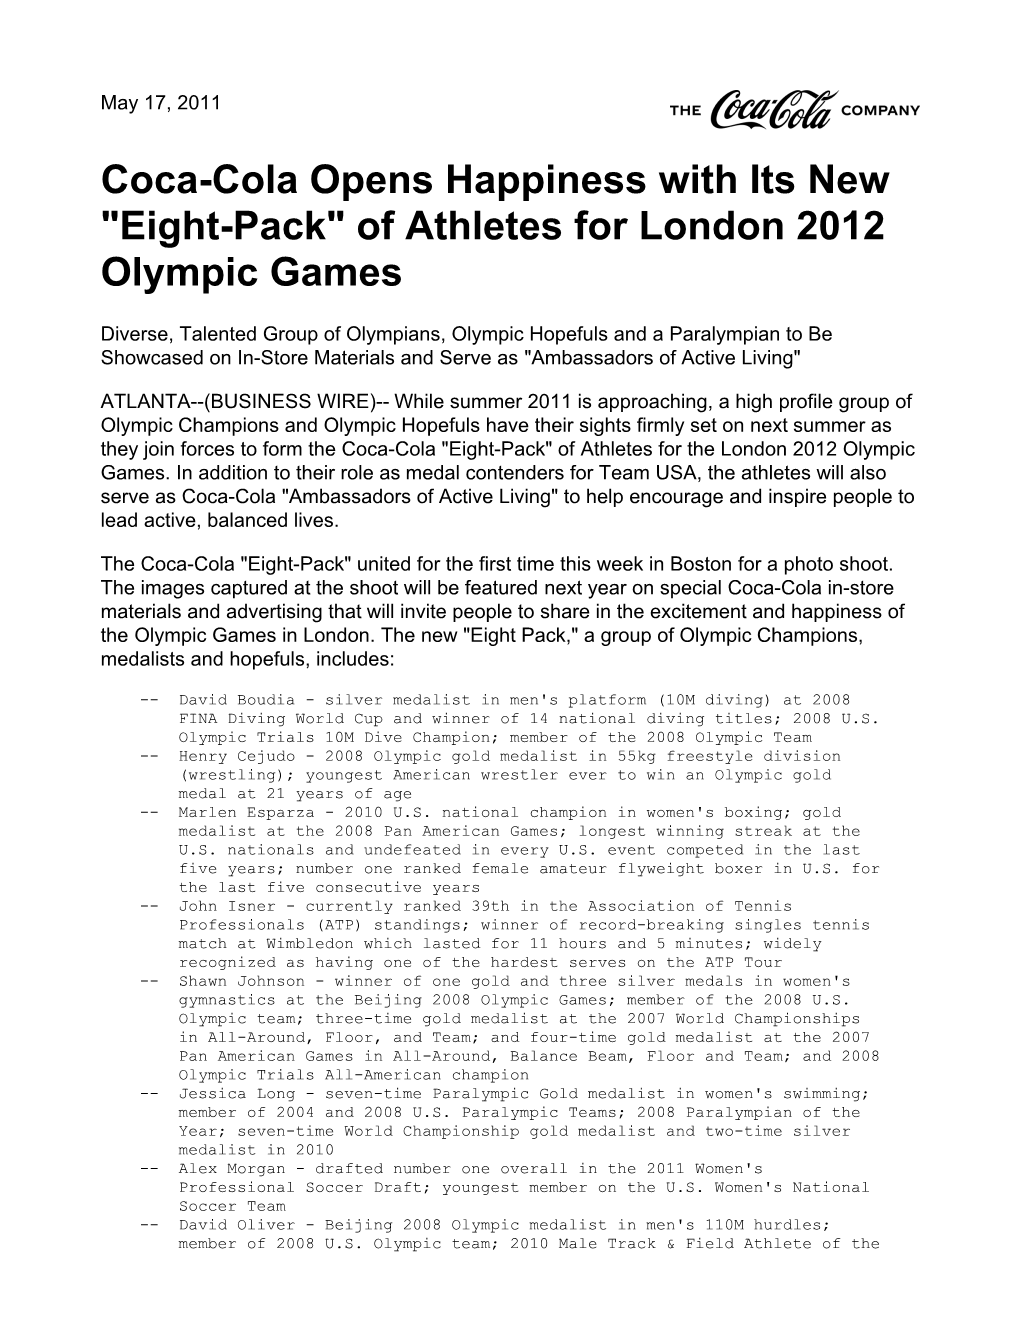 Coca-Cola Opens Happiness with Its New "Eight-Pack" of Athletes for London 2012 Olympic Games